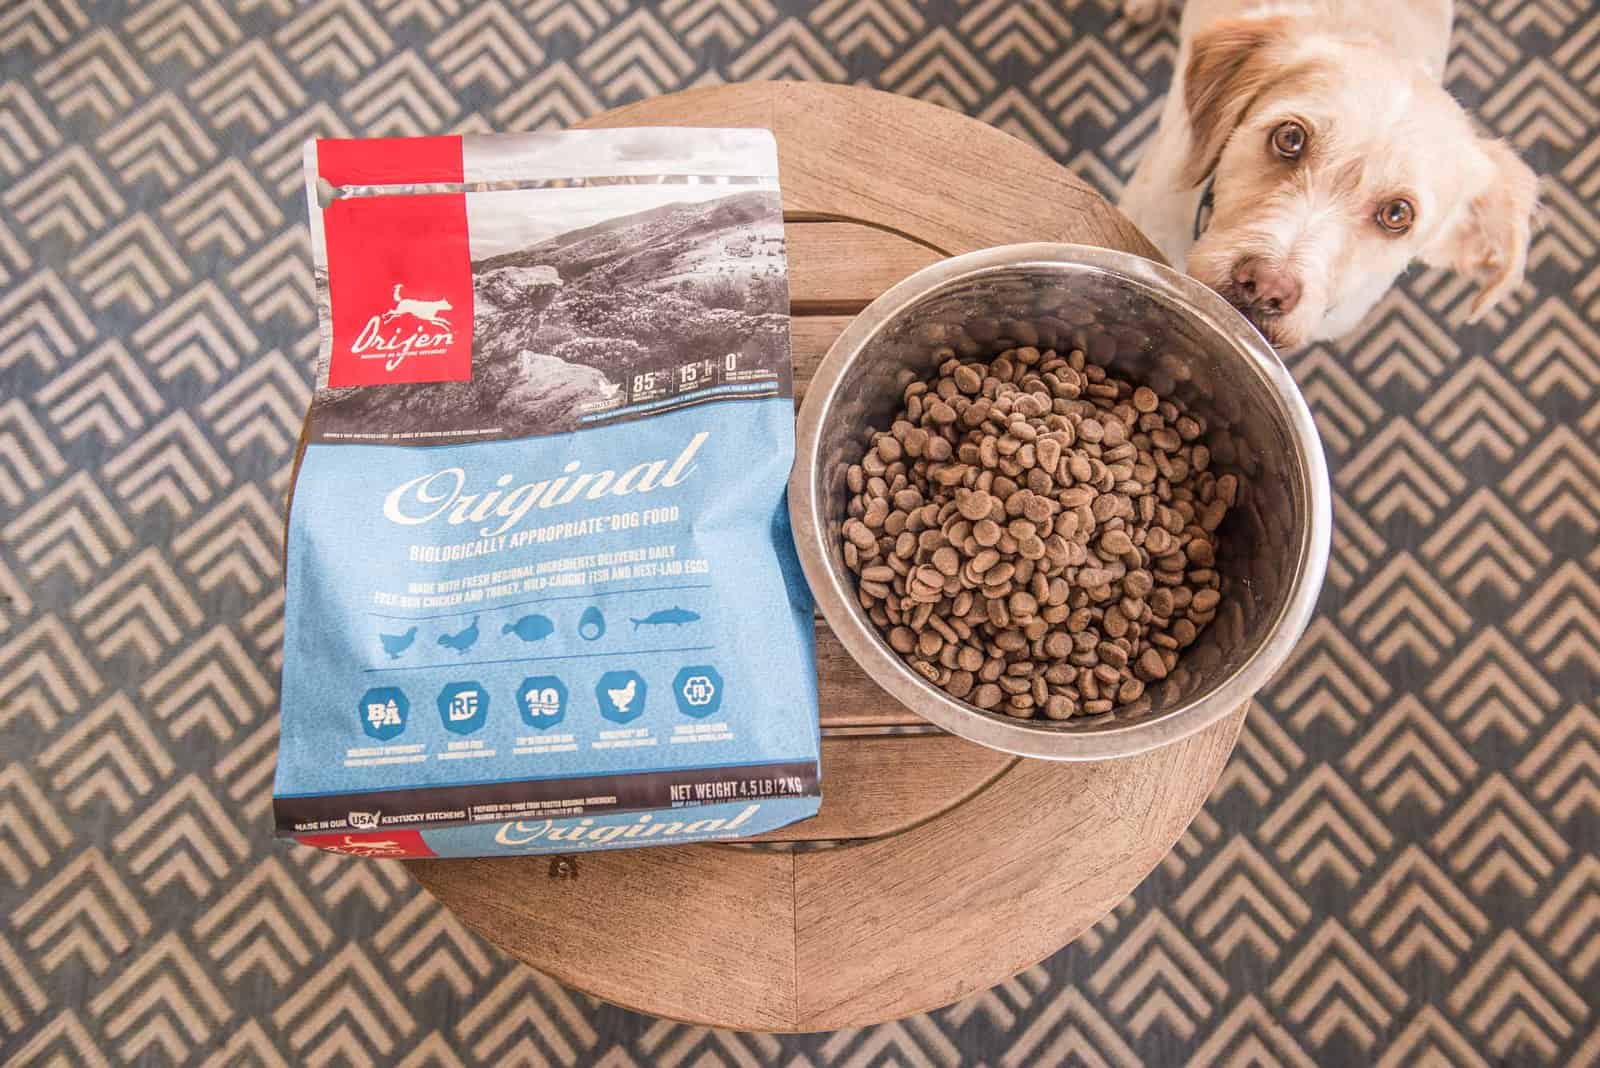 Working as a Dog Food Tester: How to Make Big Money in 2021